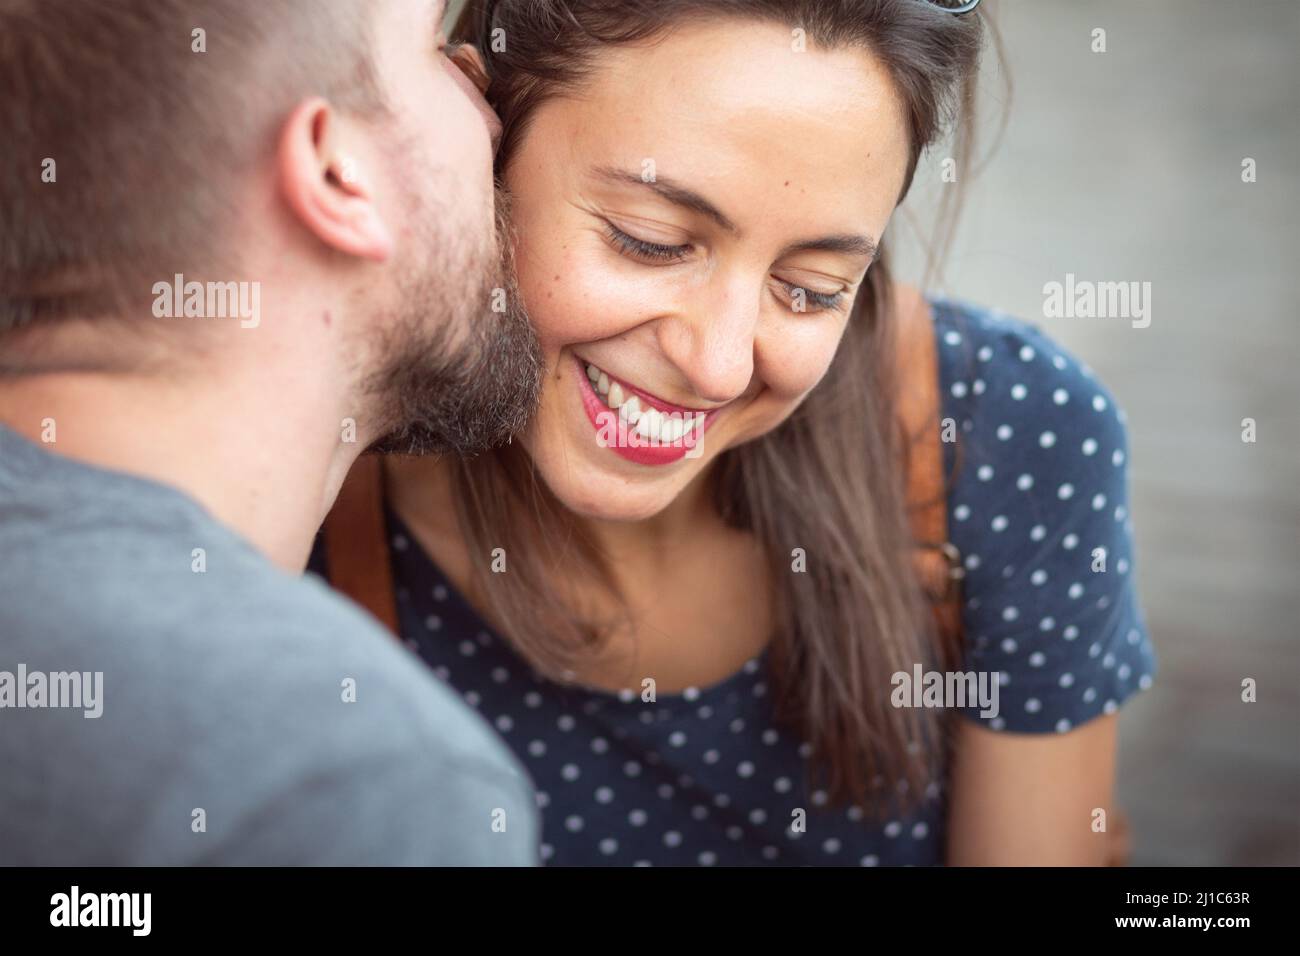 Close-up portrait of a happy couple sitting together outdoors Stock Photo